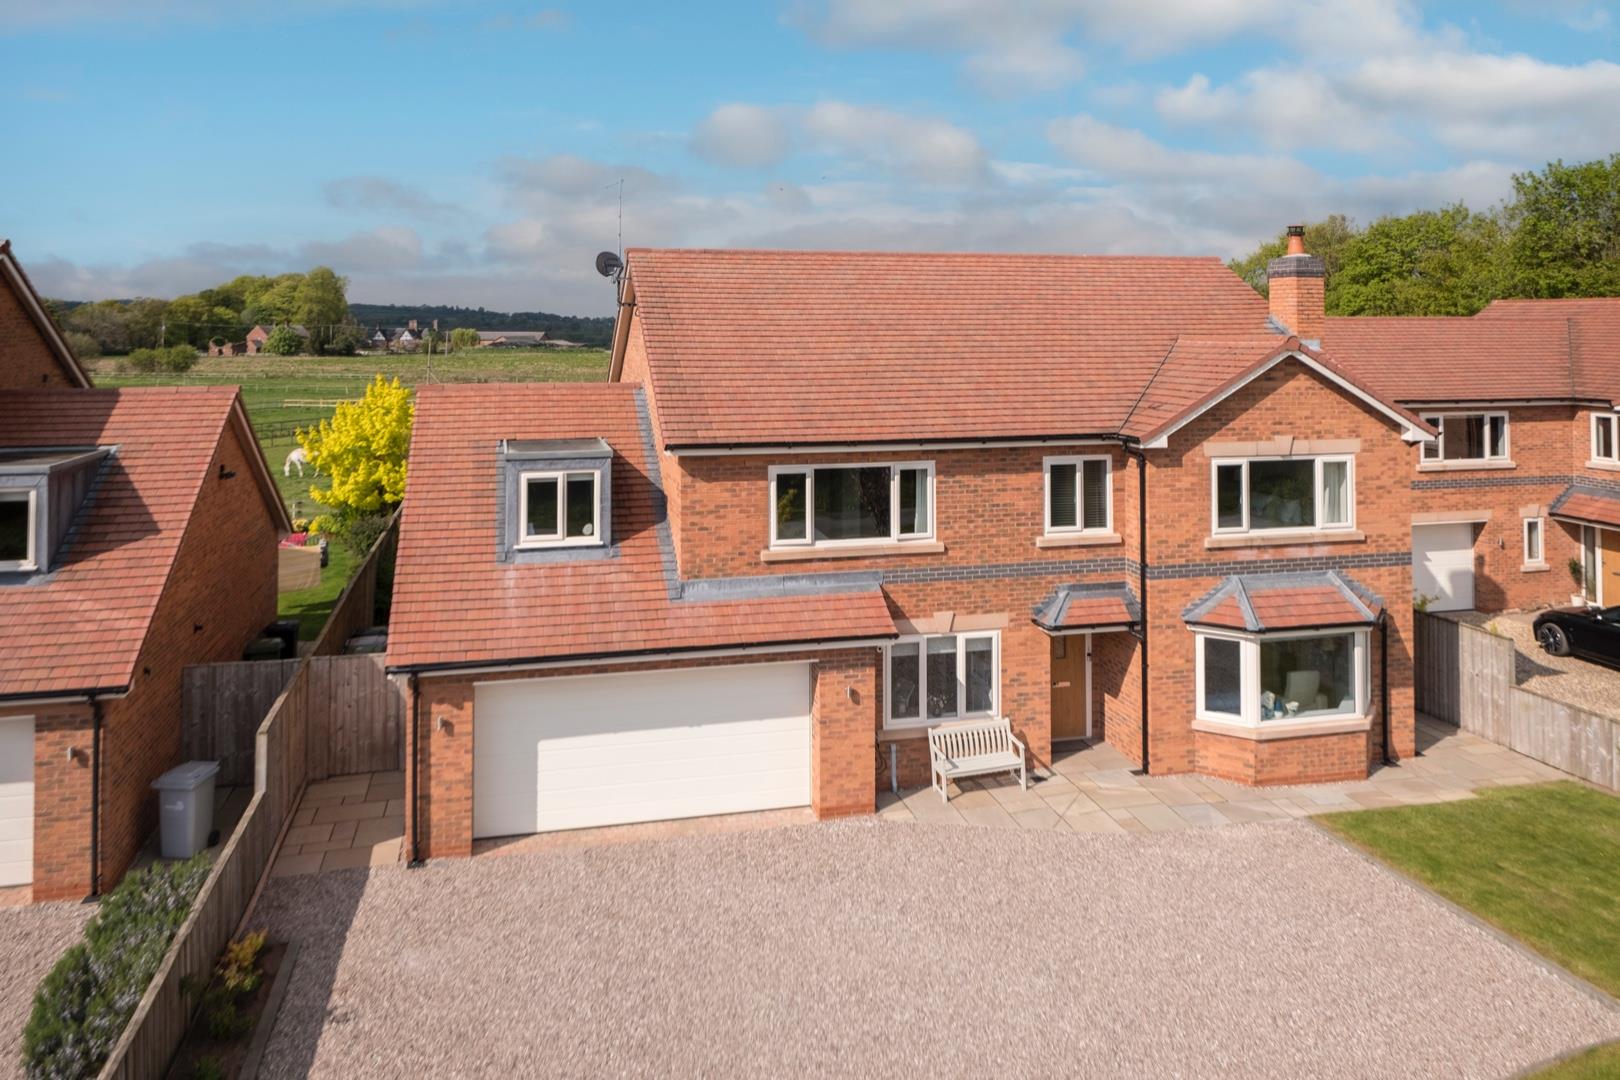 5 bedroom  Detached House for Sale in Tilstone Fearnall